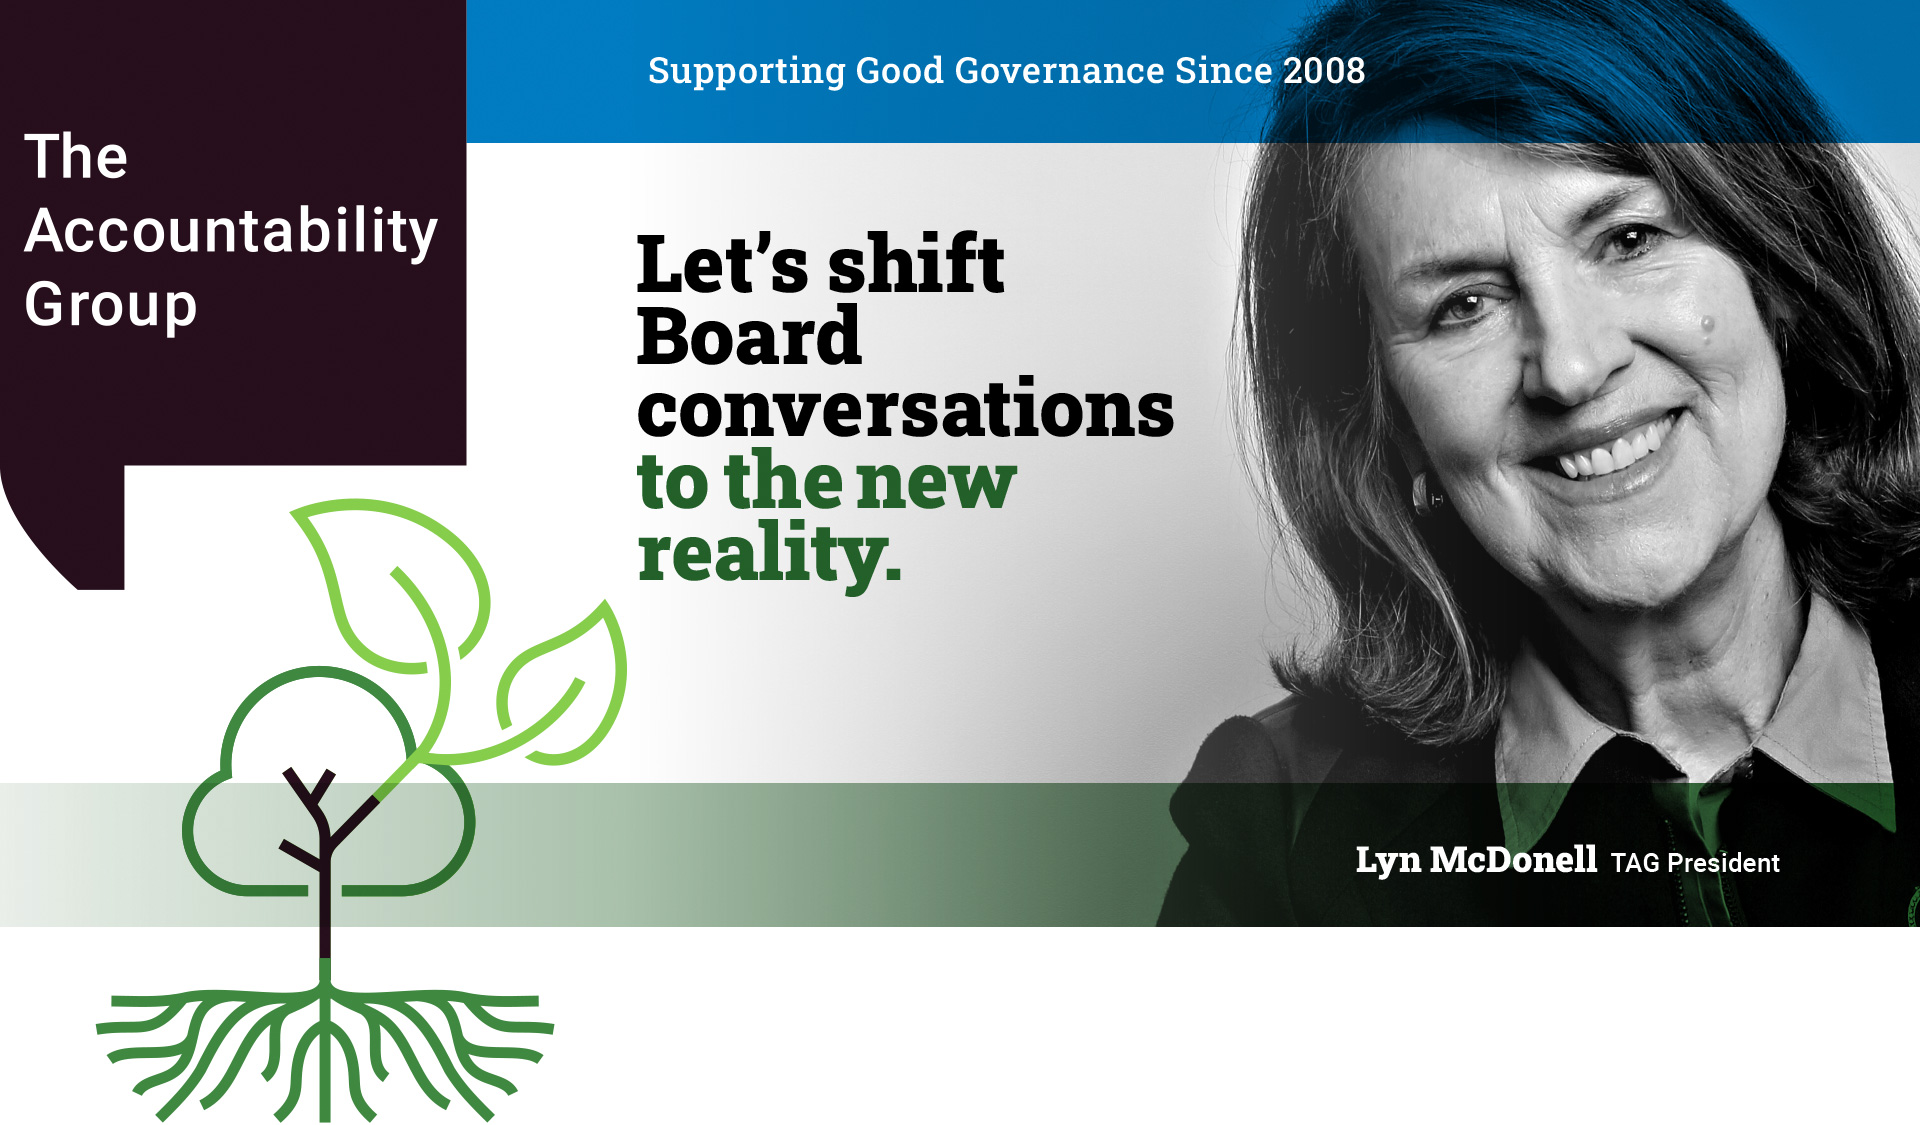 The Accountability Group: Supporting Good Governance Since 2008